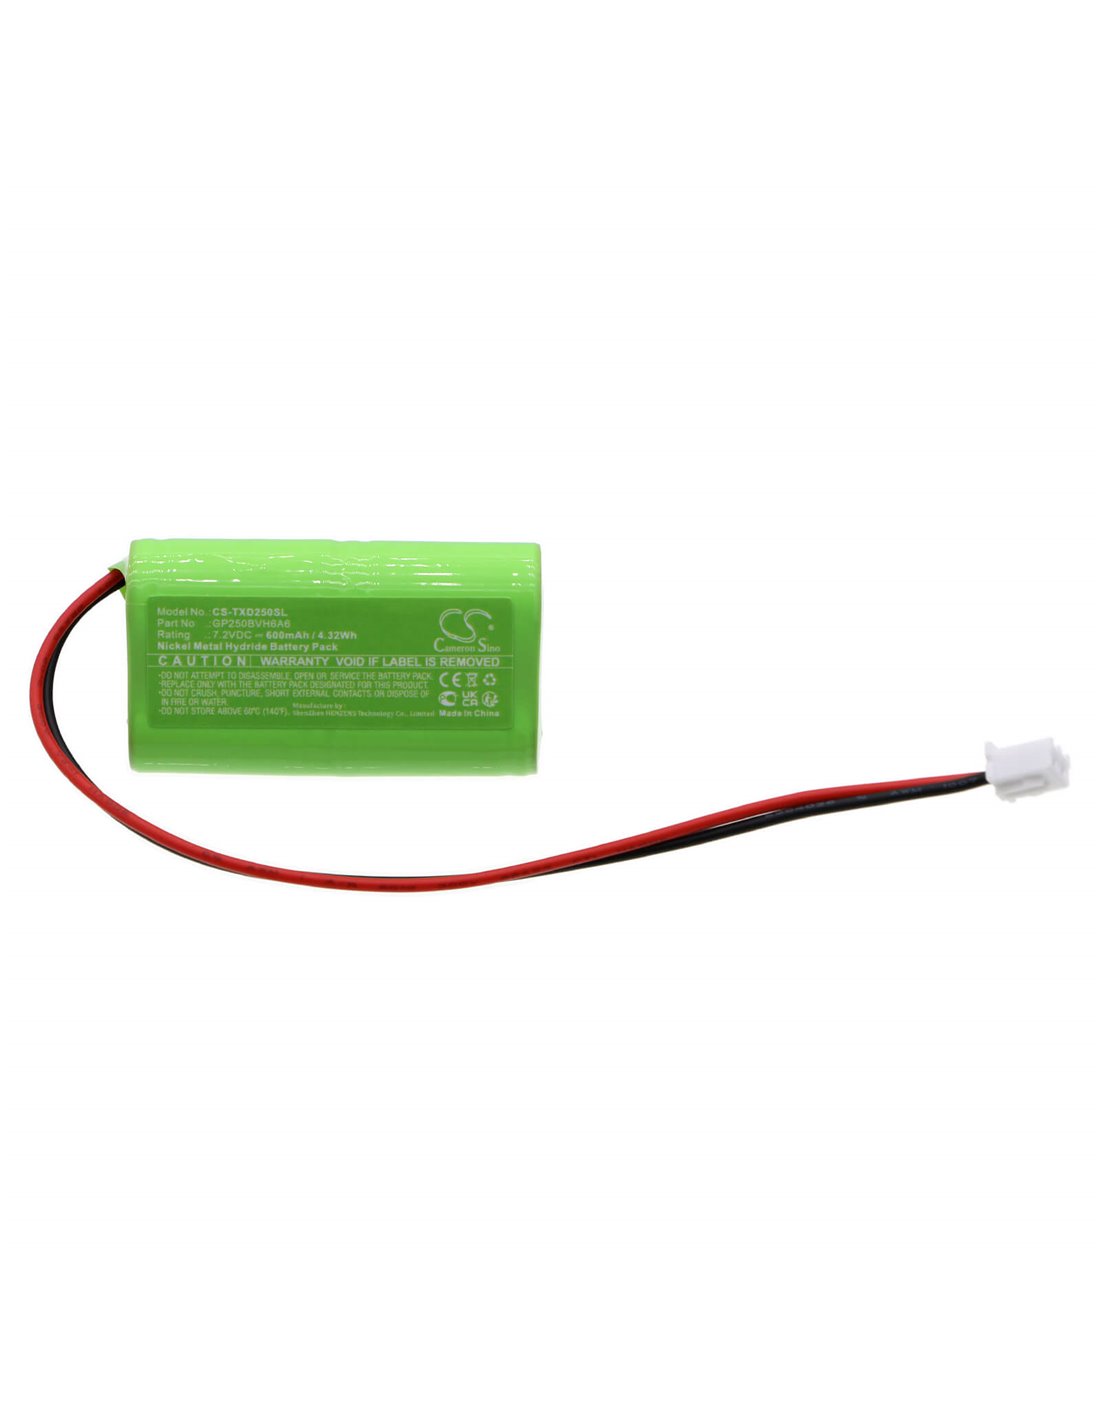 7.2V, Ni-MH, 600mAh, Battery fits Texecom, Bell Box Sounder, Odyssey Extended Life Siren Al, 4.32Wh